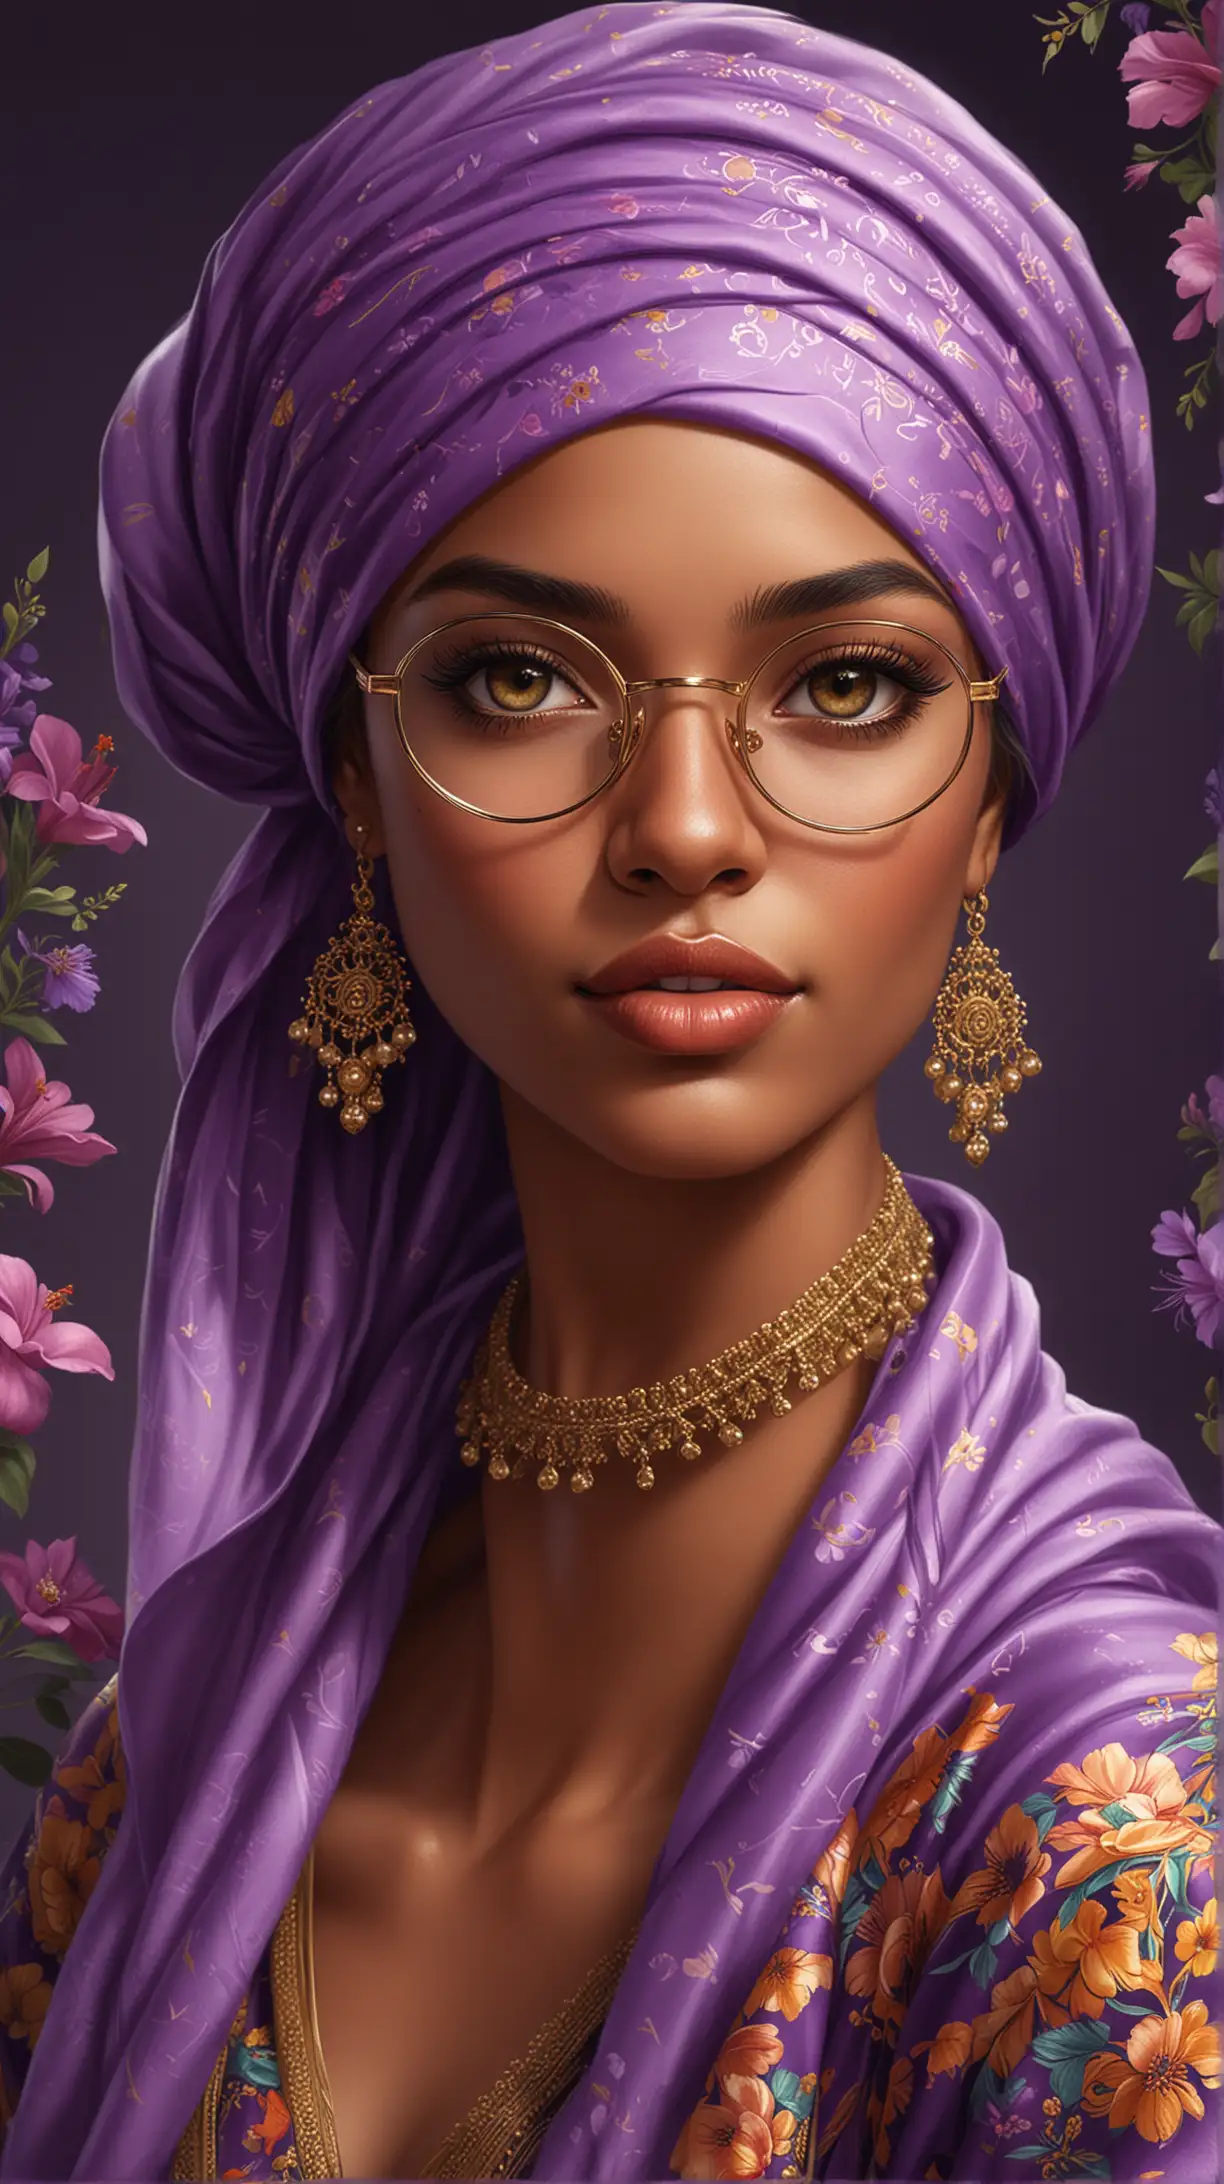 Sophisticated Ebony Portrait with Floral Headscarf and Round Glasses